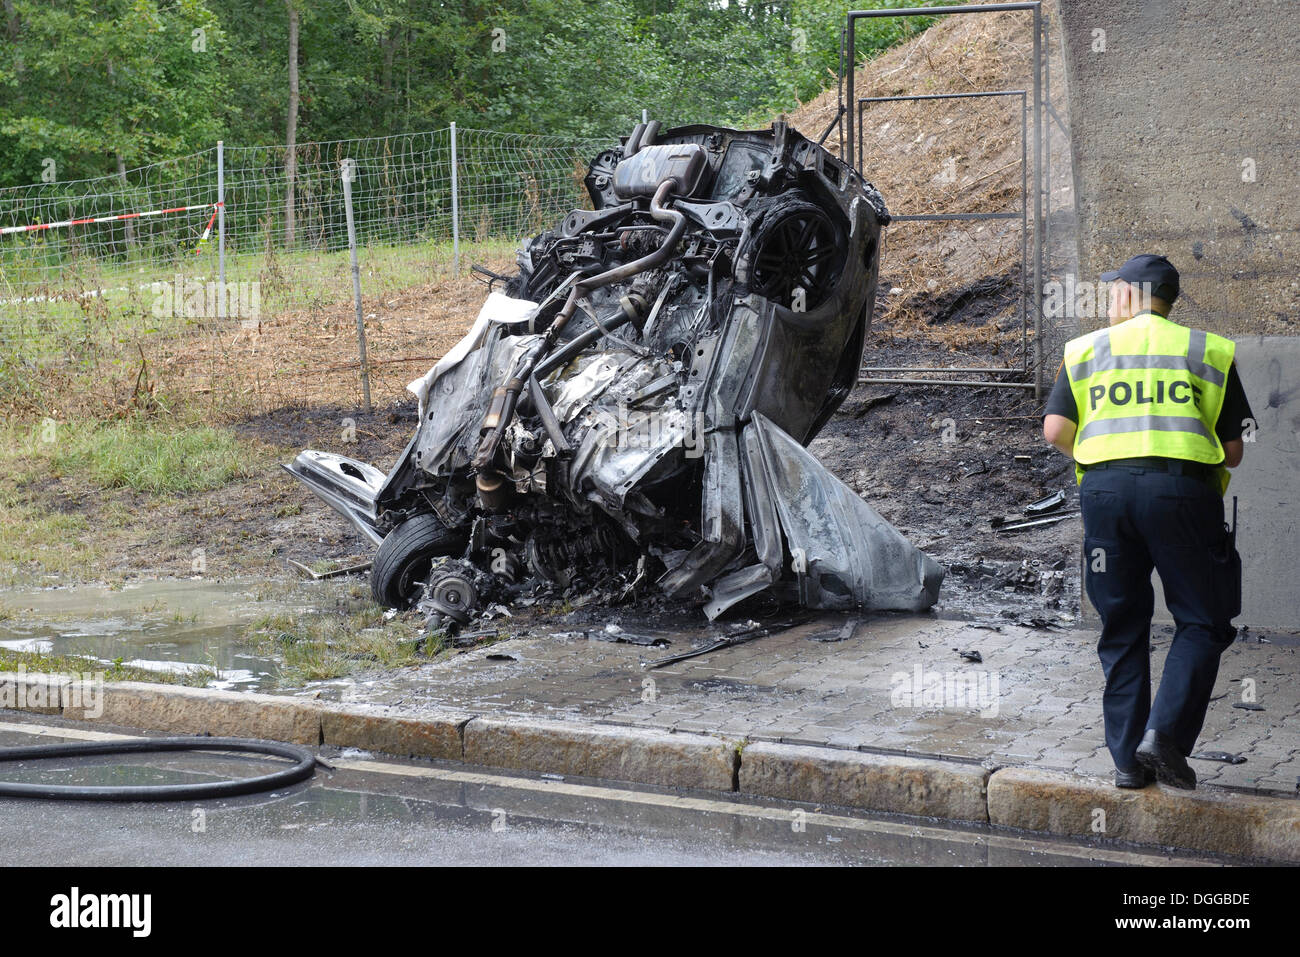 Wreck of an Audi car after a violent collision against the pillar of a bridge, US military police officer attending the wreckage Stock Photo